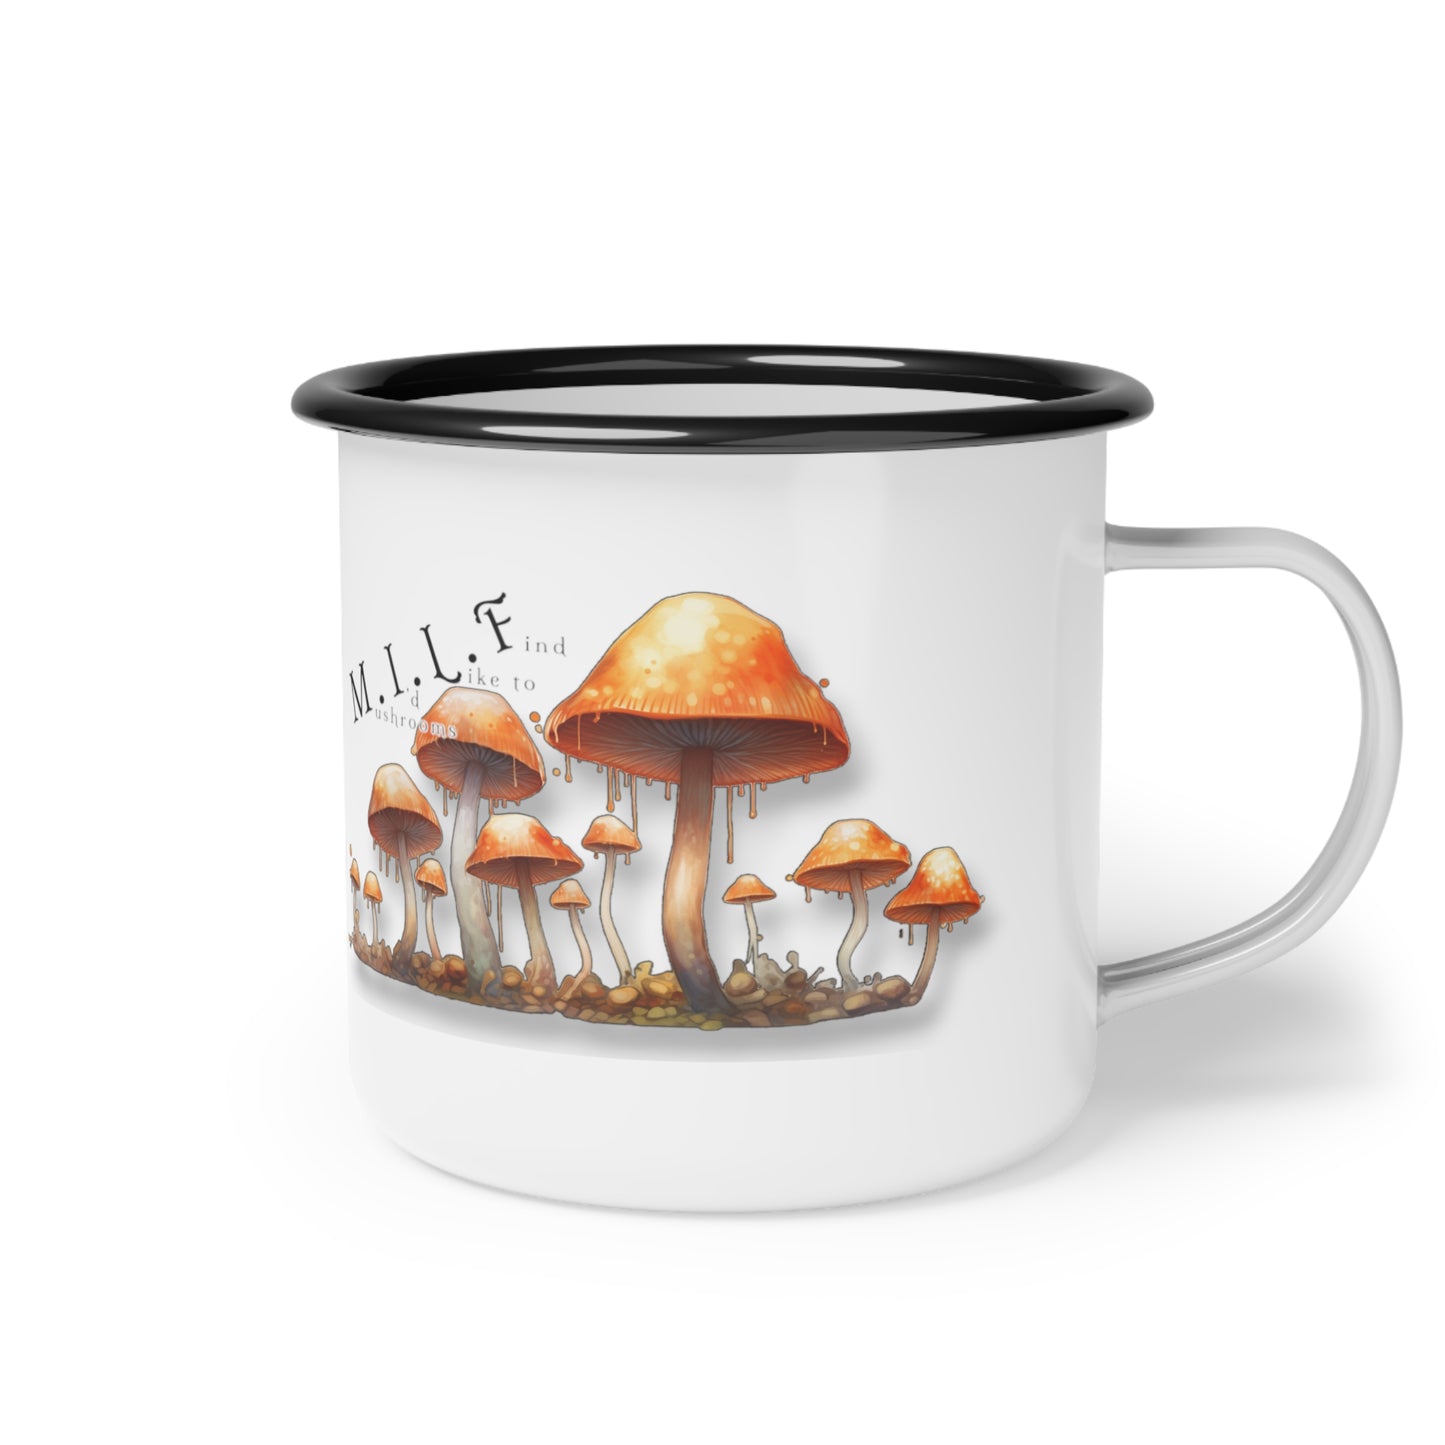 "Mushrooms I'd Like to Find" - Enamel Coated Metal Camping Cup